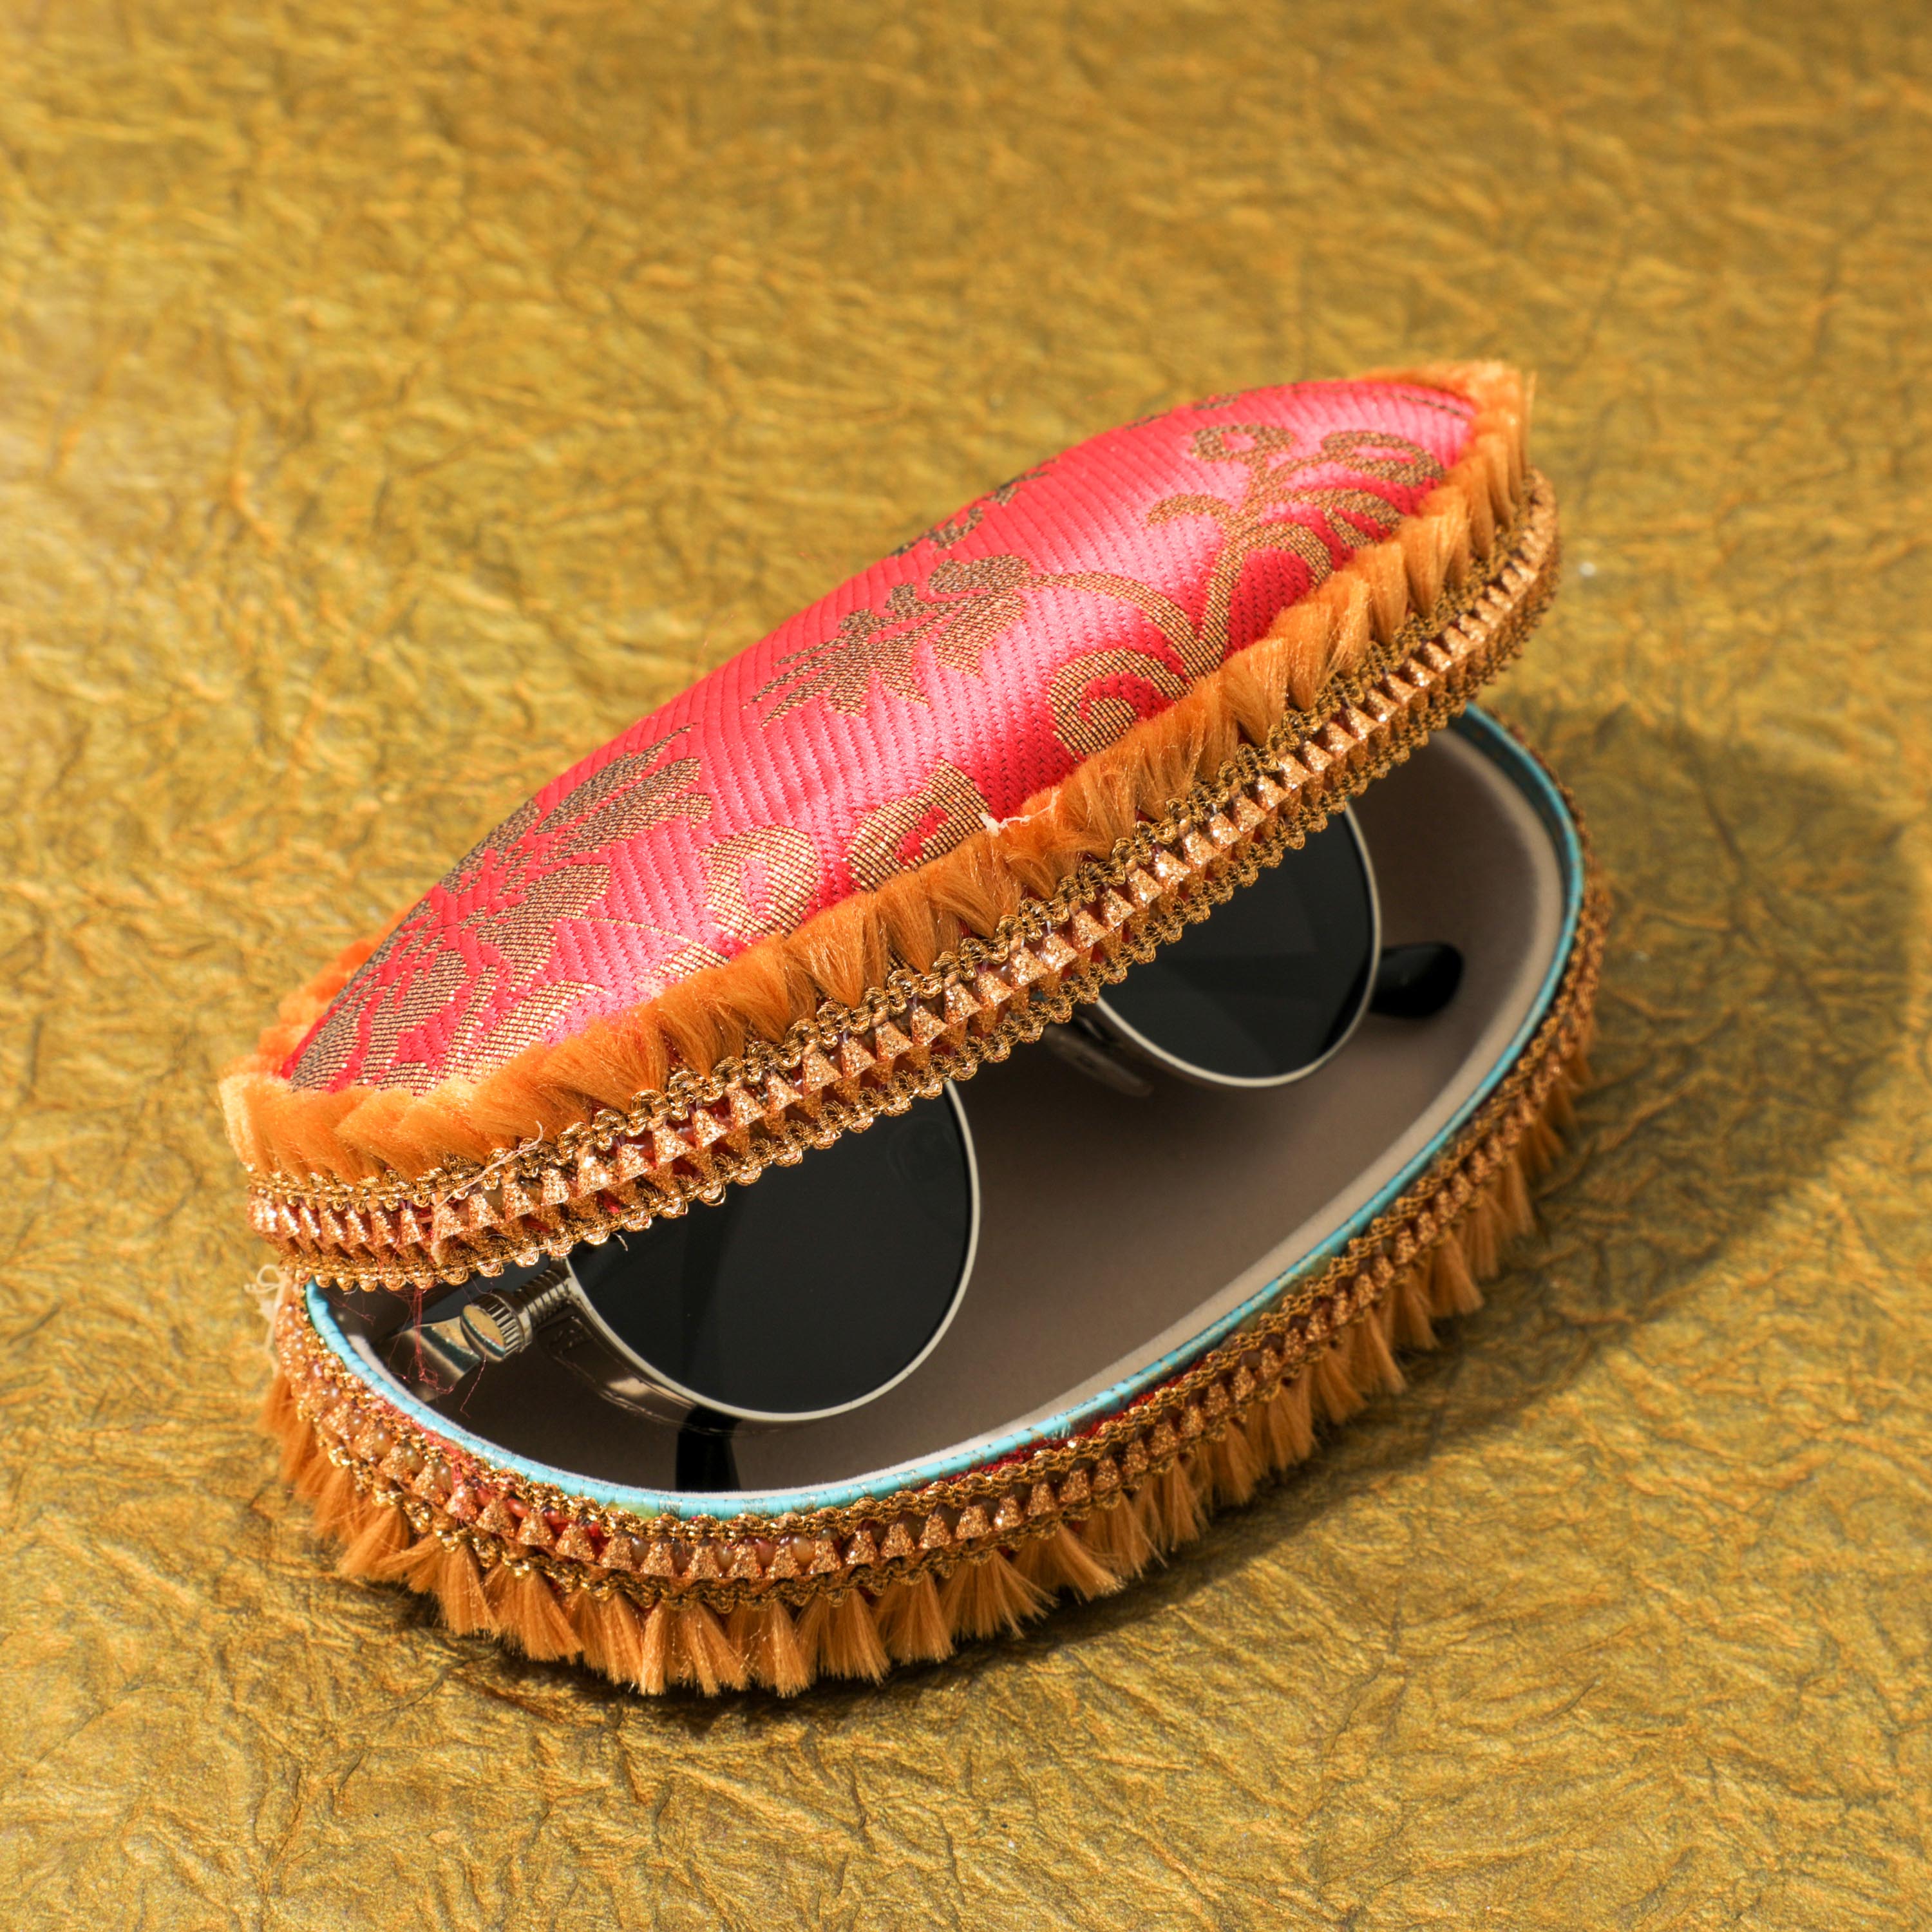 Sunglass case for gifting to friends and family